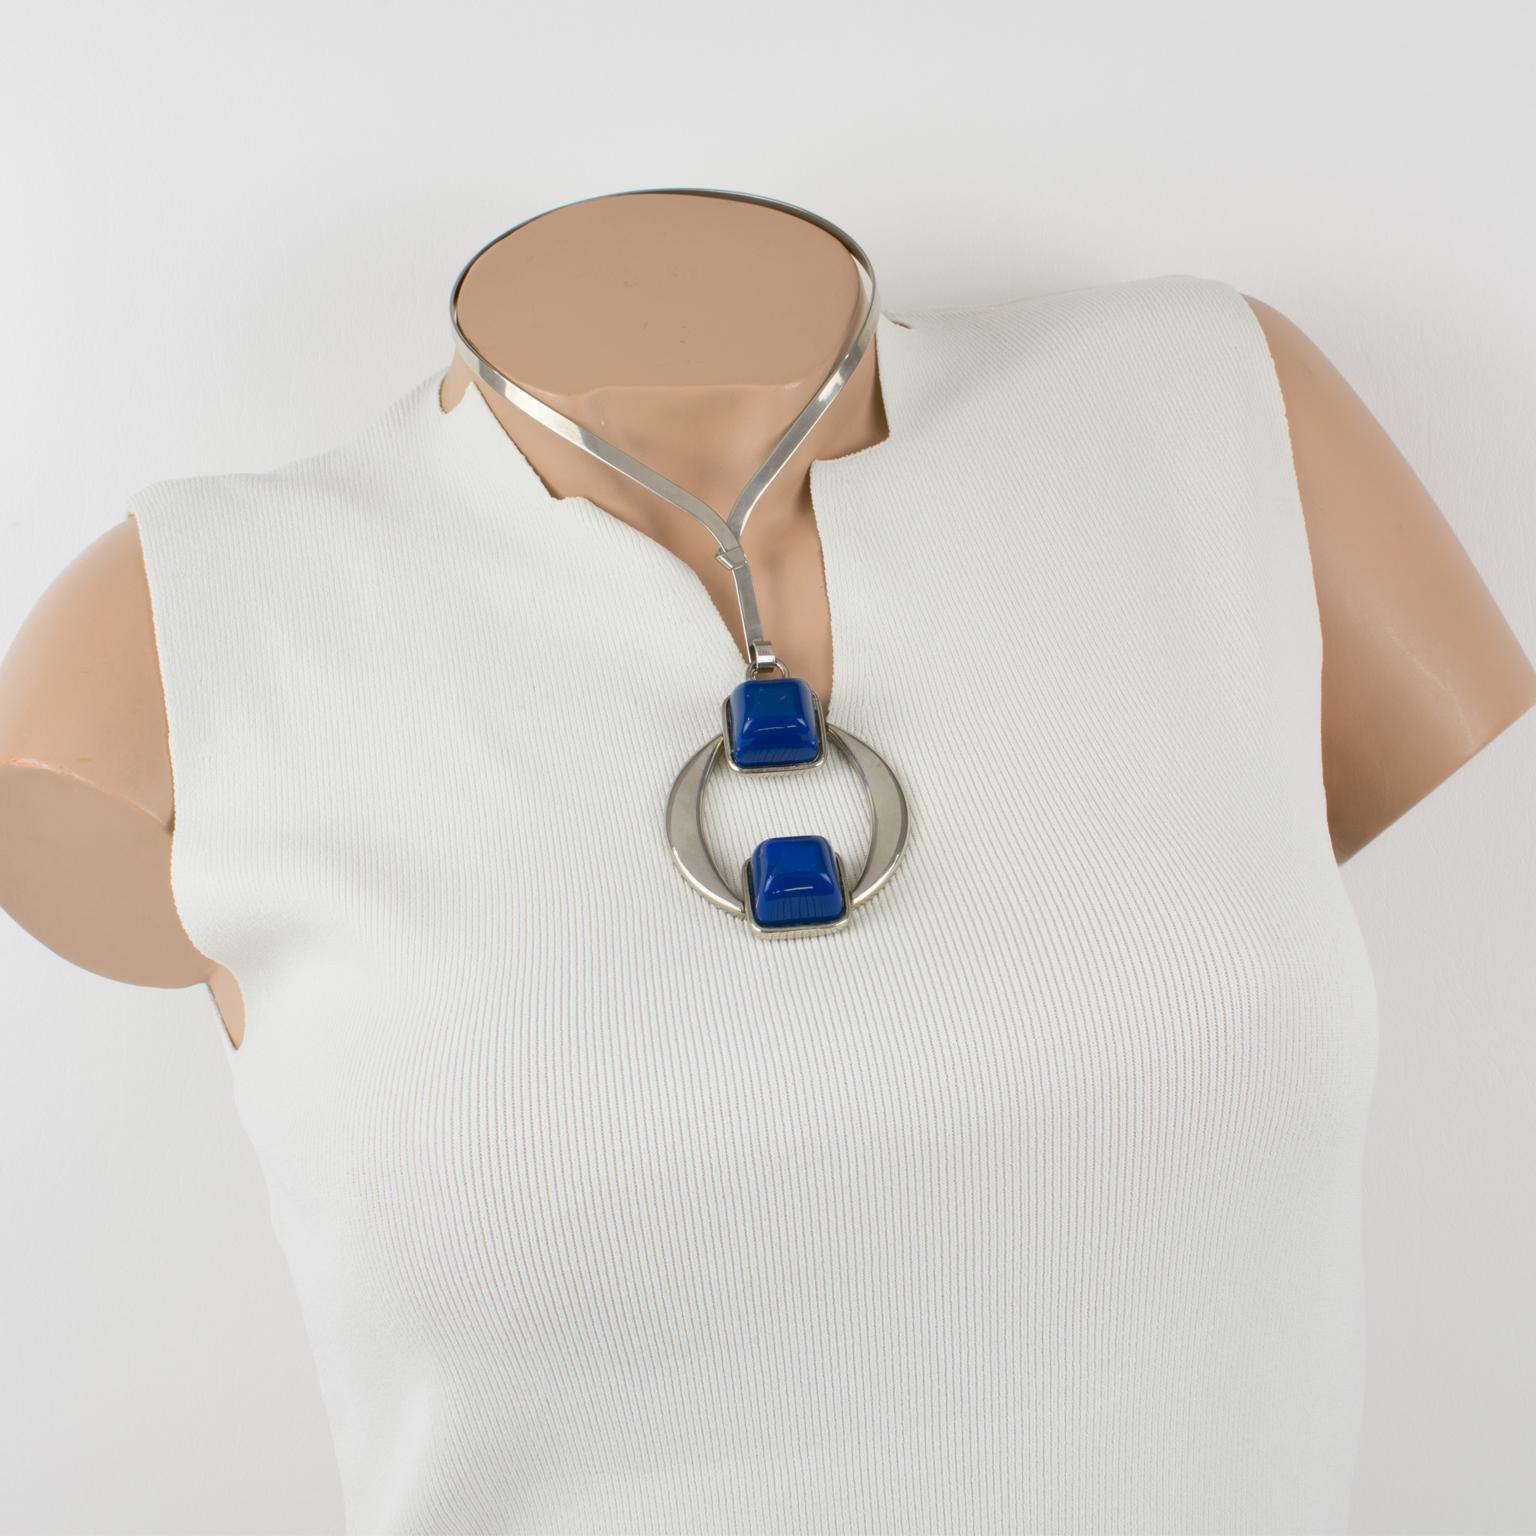 This stylish Mid-Century Modern Space Age collar necklace has a geometric pendant. The stainless steel rigid neckband is designed with a futuristic medallion attached to it. That pendant is ornate with dimensional cobalt blue resin cabochons. There